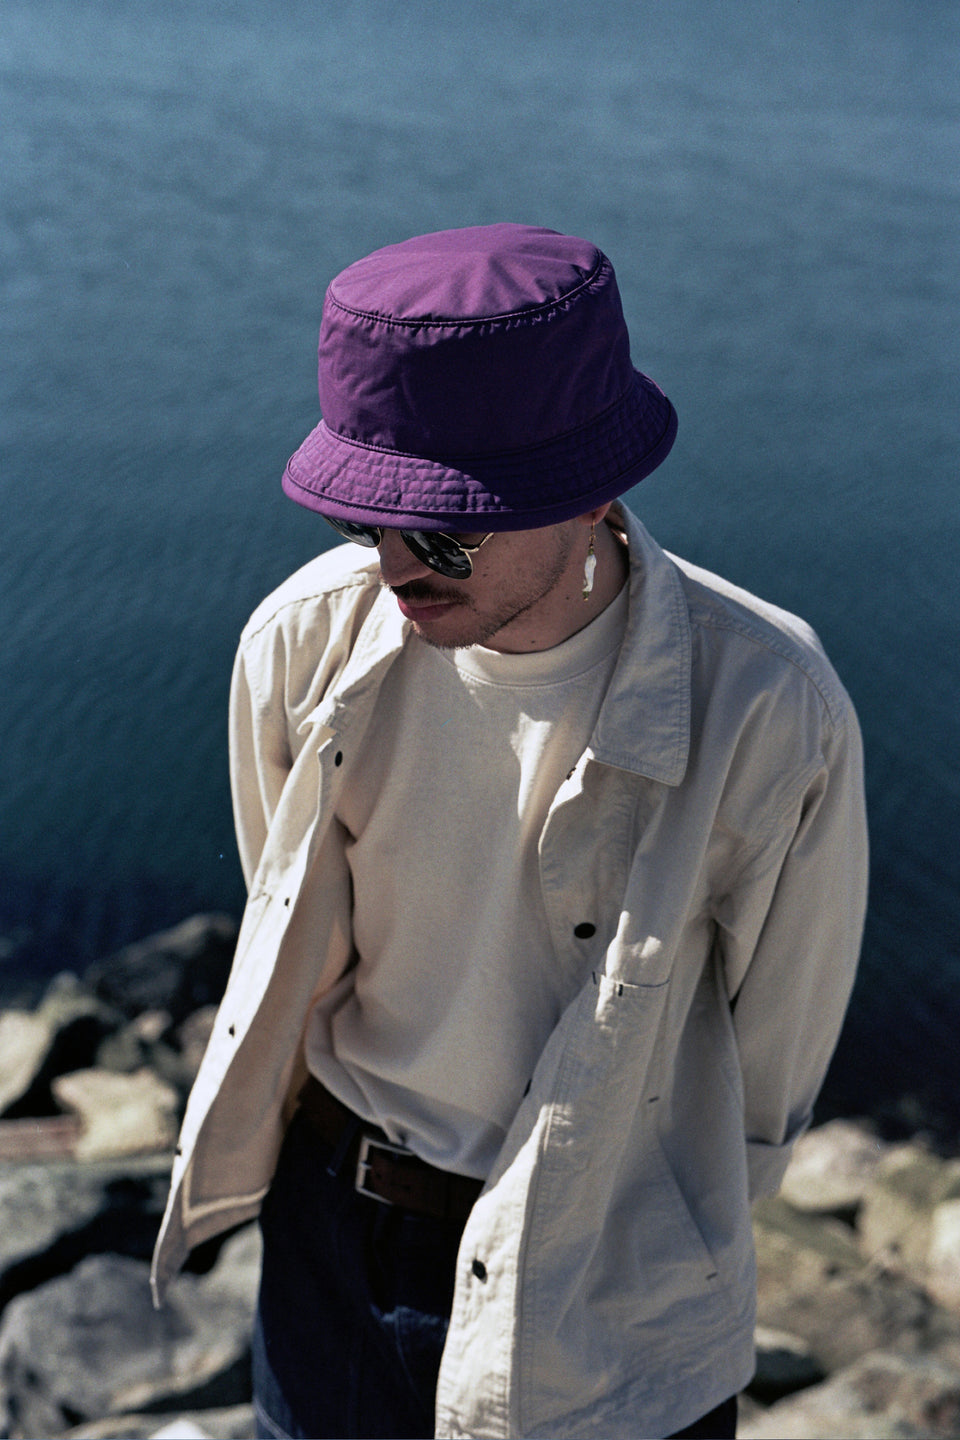 Found Feather SS21 Packable Boonie Crusher Hat Toray Purple Calculus Victoria BC Canada